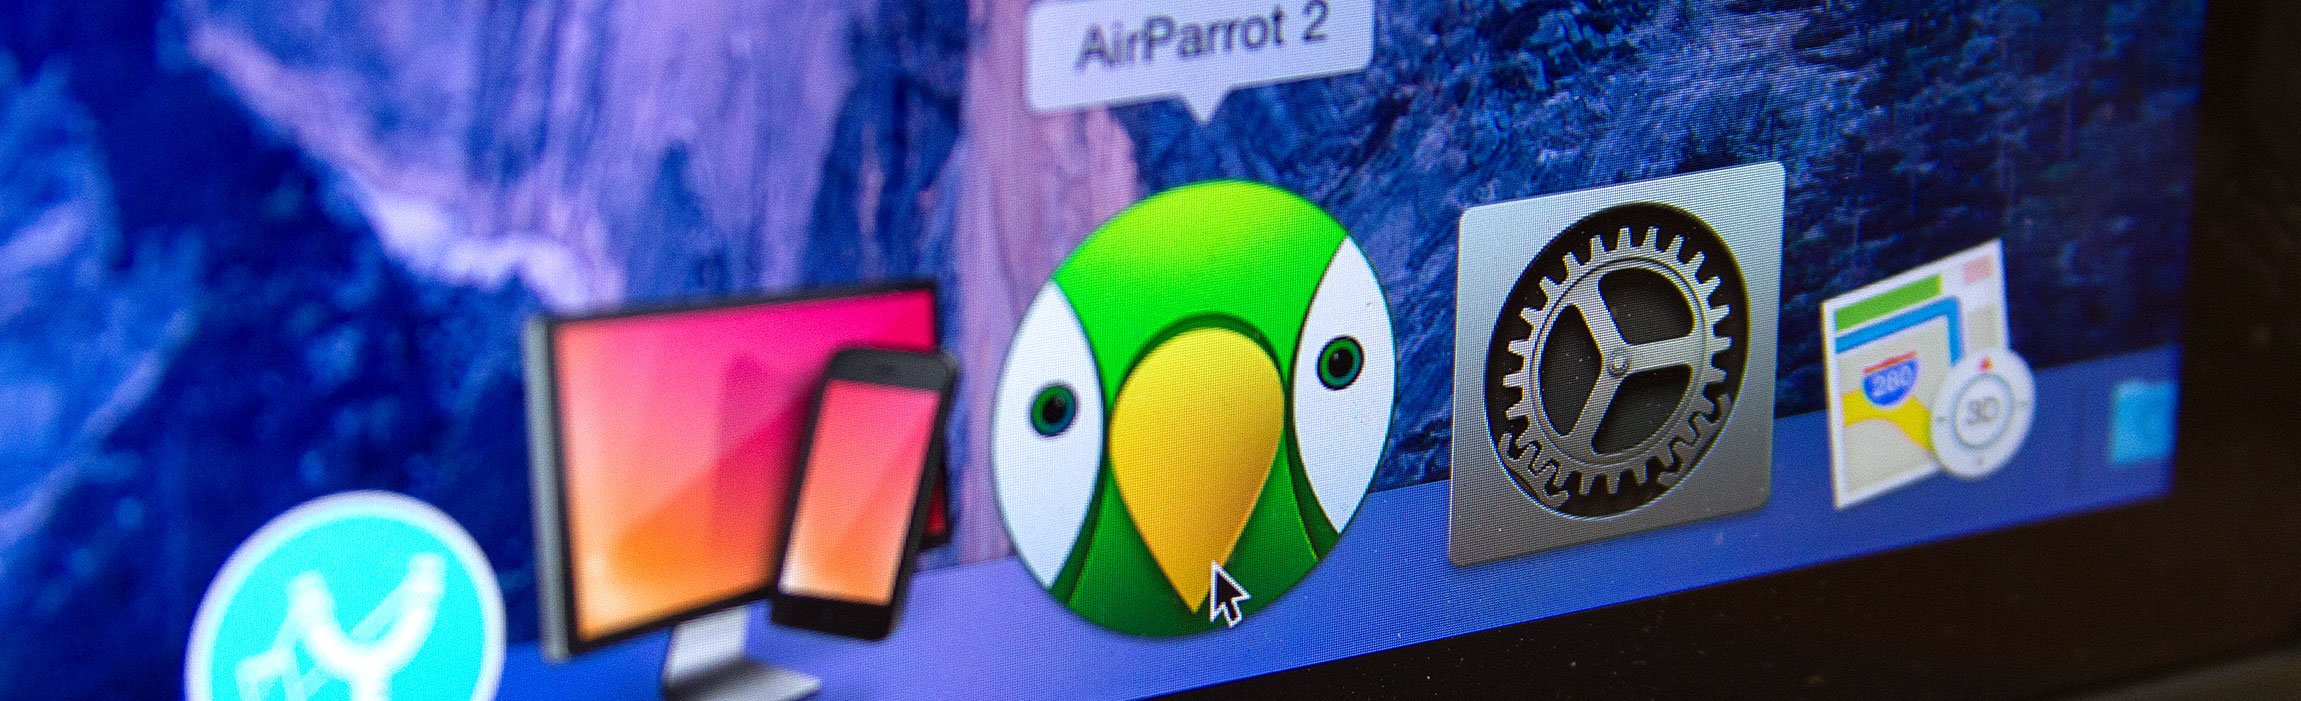 airparrot 2 vs airparrot 3